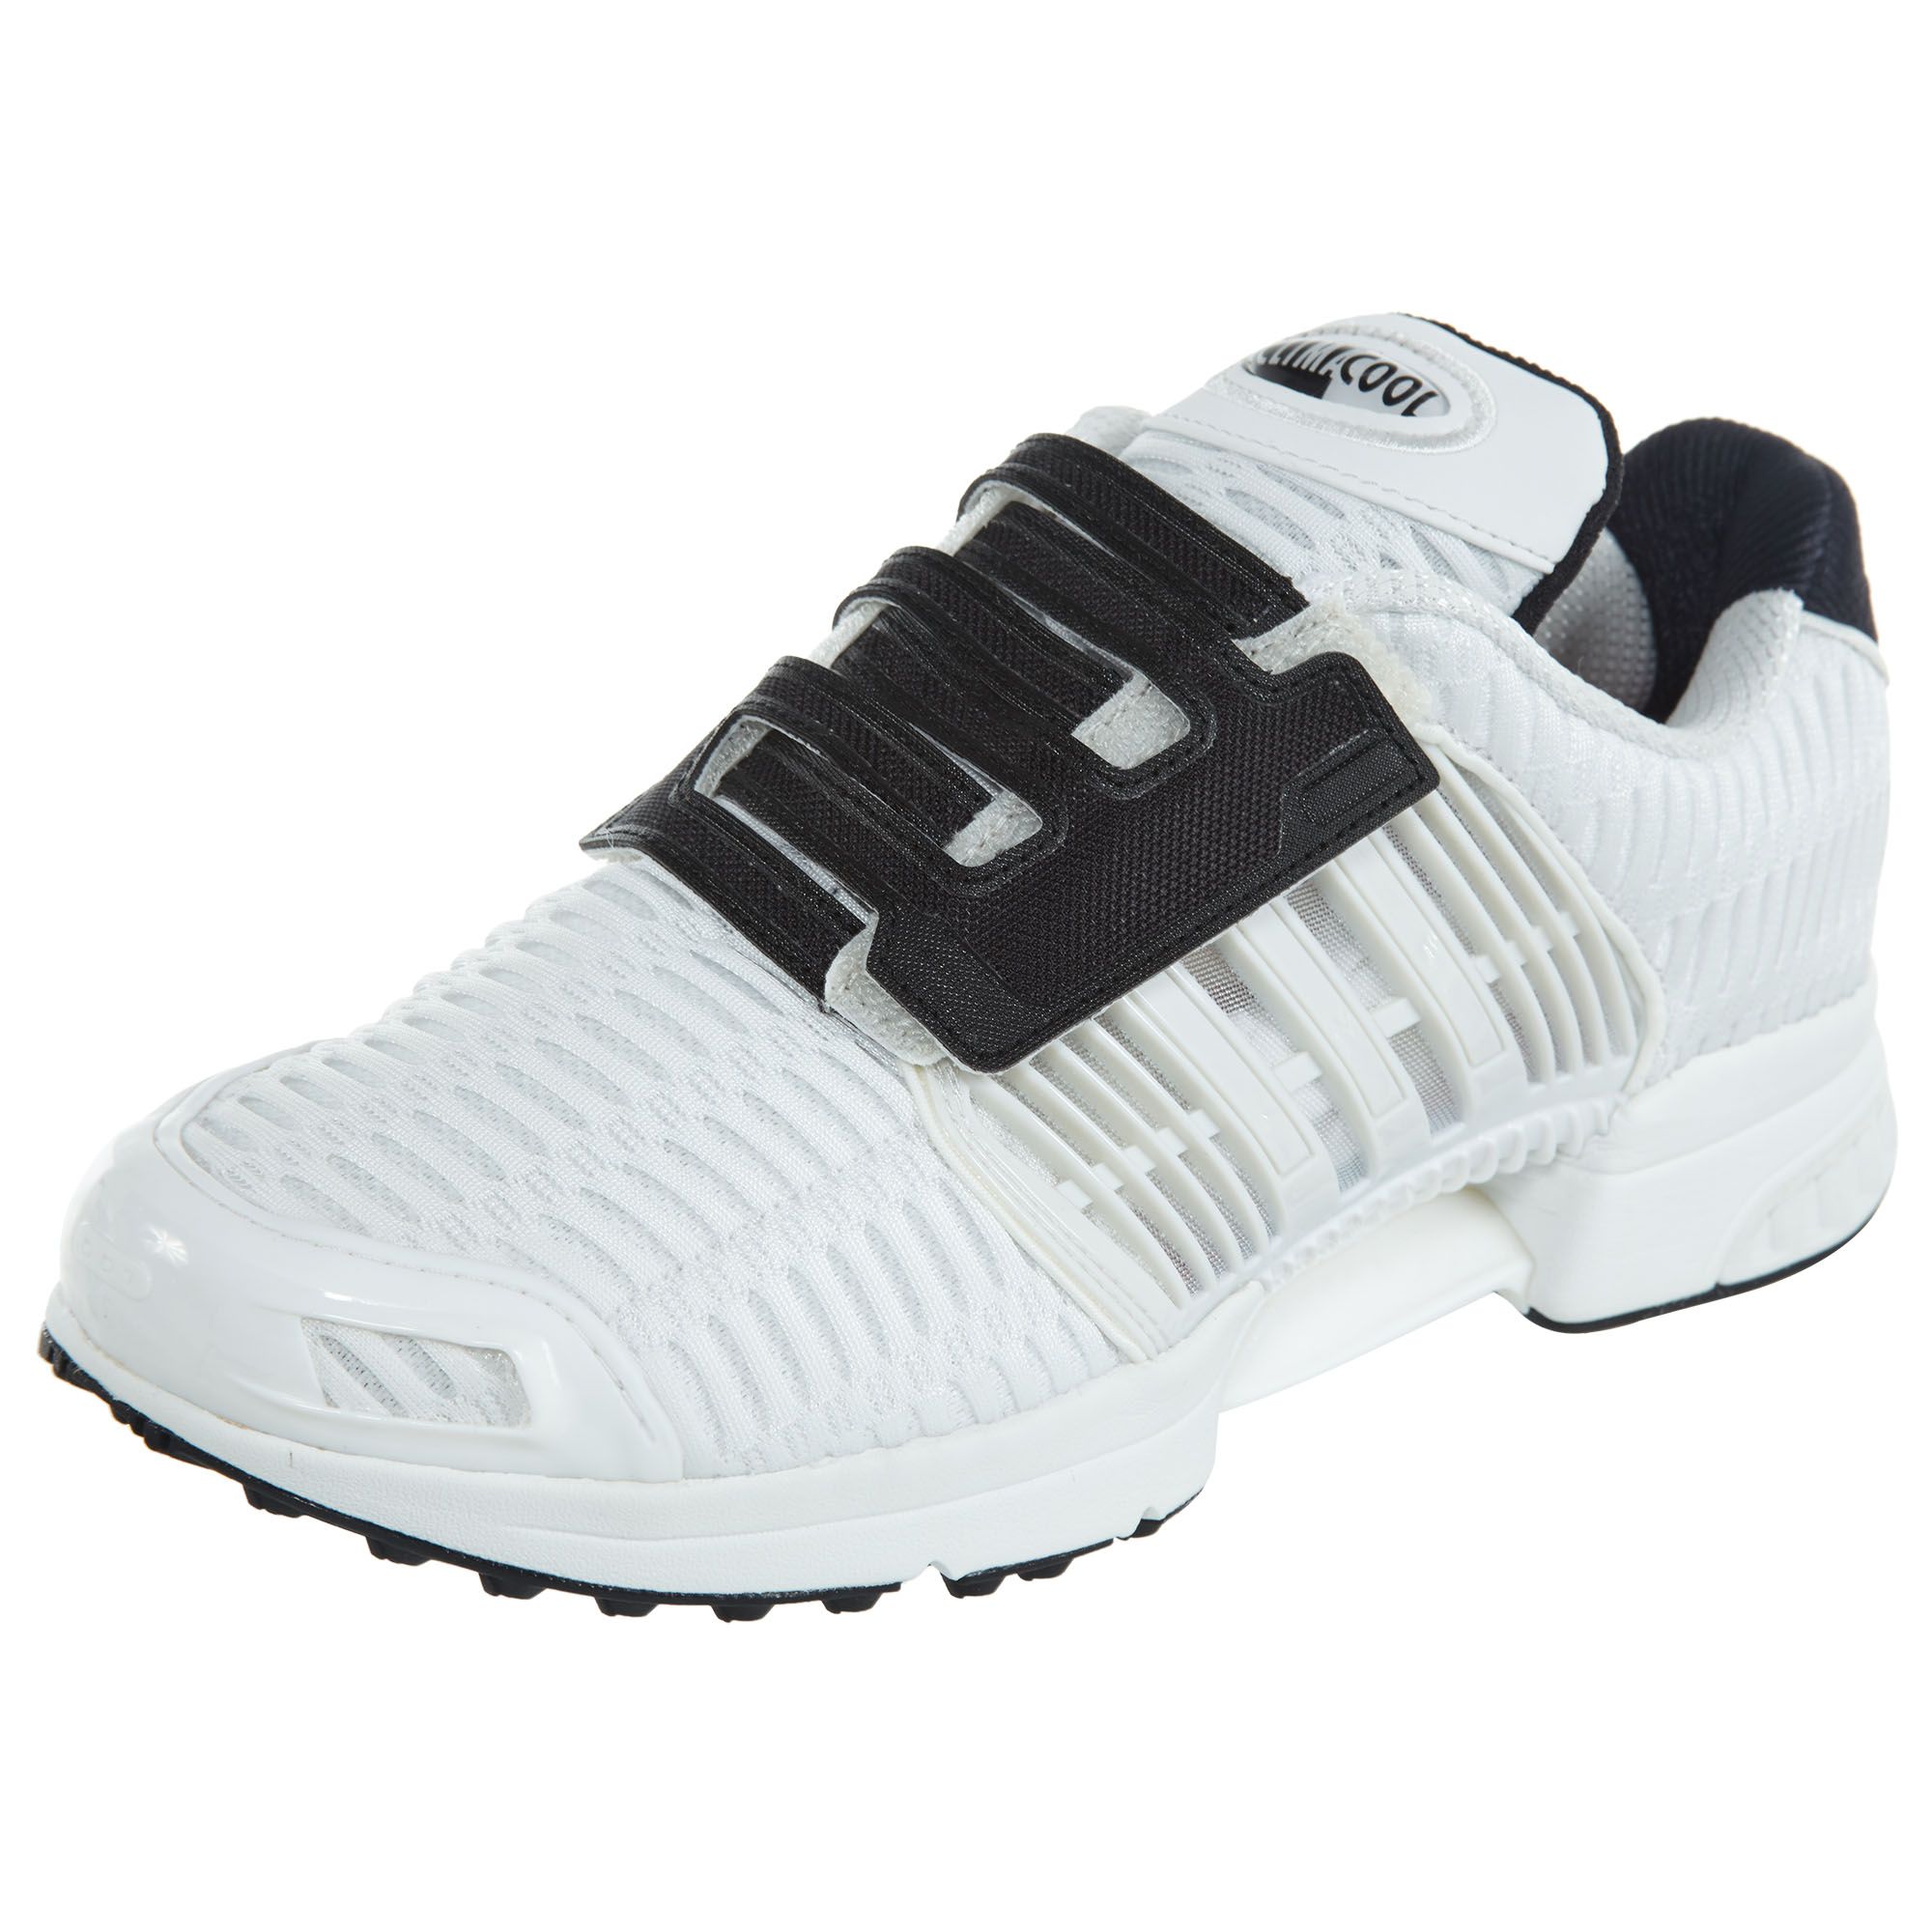 Adidas Climacool 1 Cmf Mens Style 